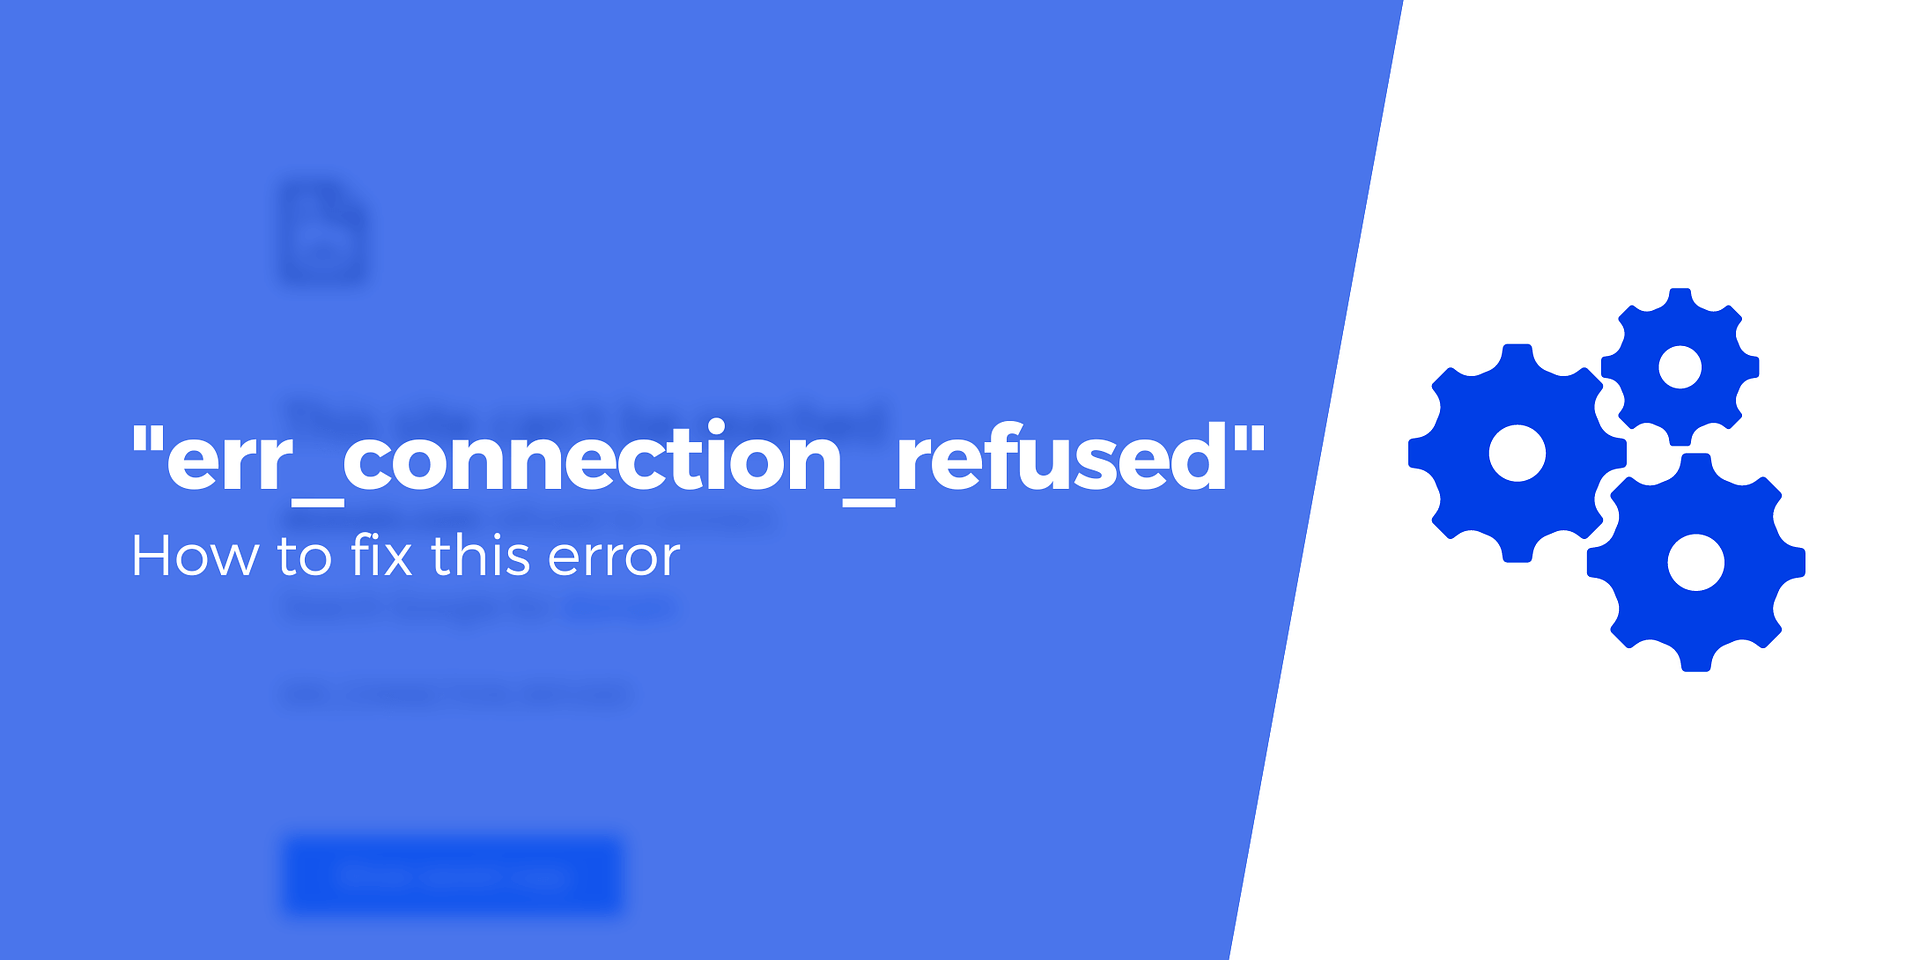 How to Fix “err_connection_refused”: A Comprehensive Guide